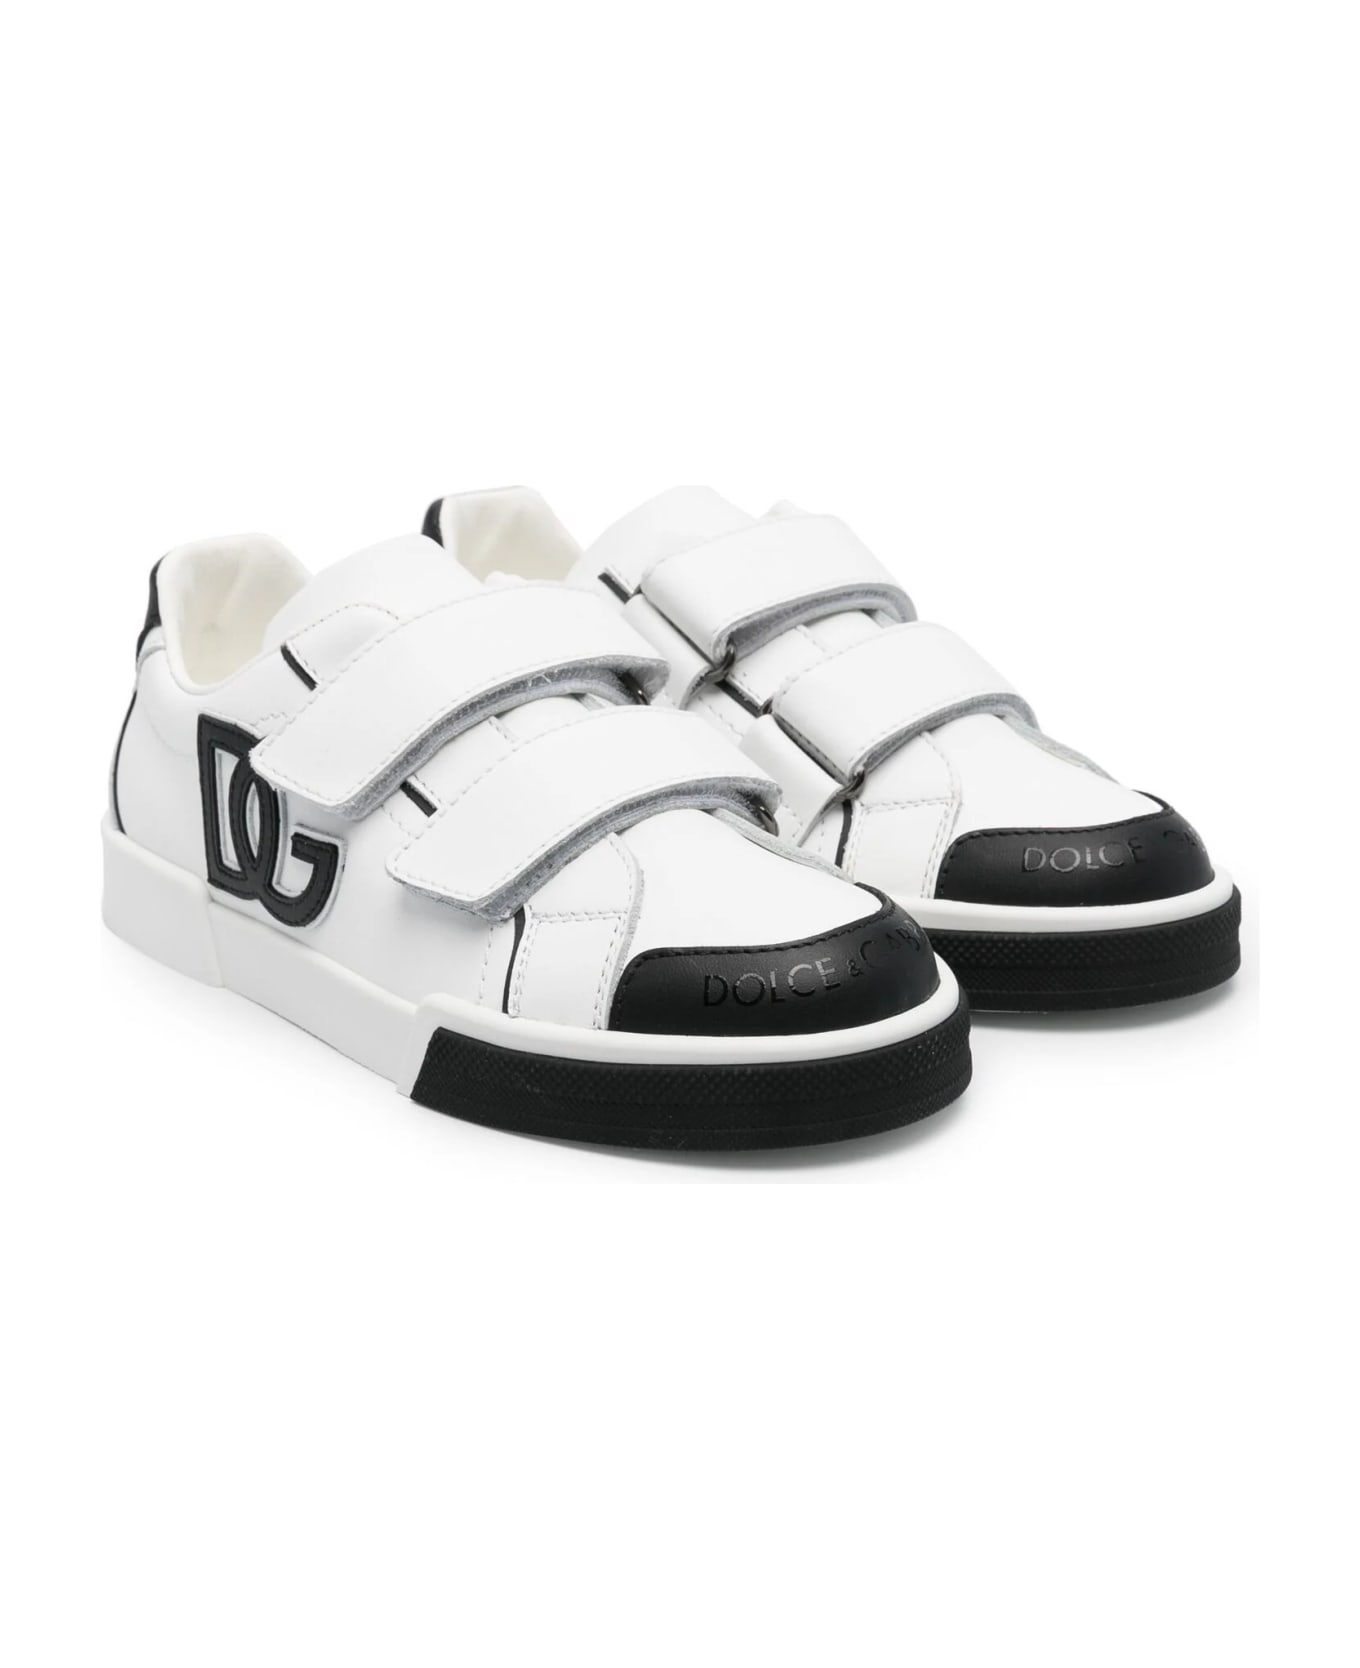 Dolce & Gabbana White And Black Sneakers With Dg Logo - White